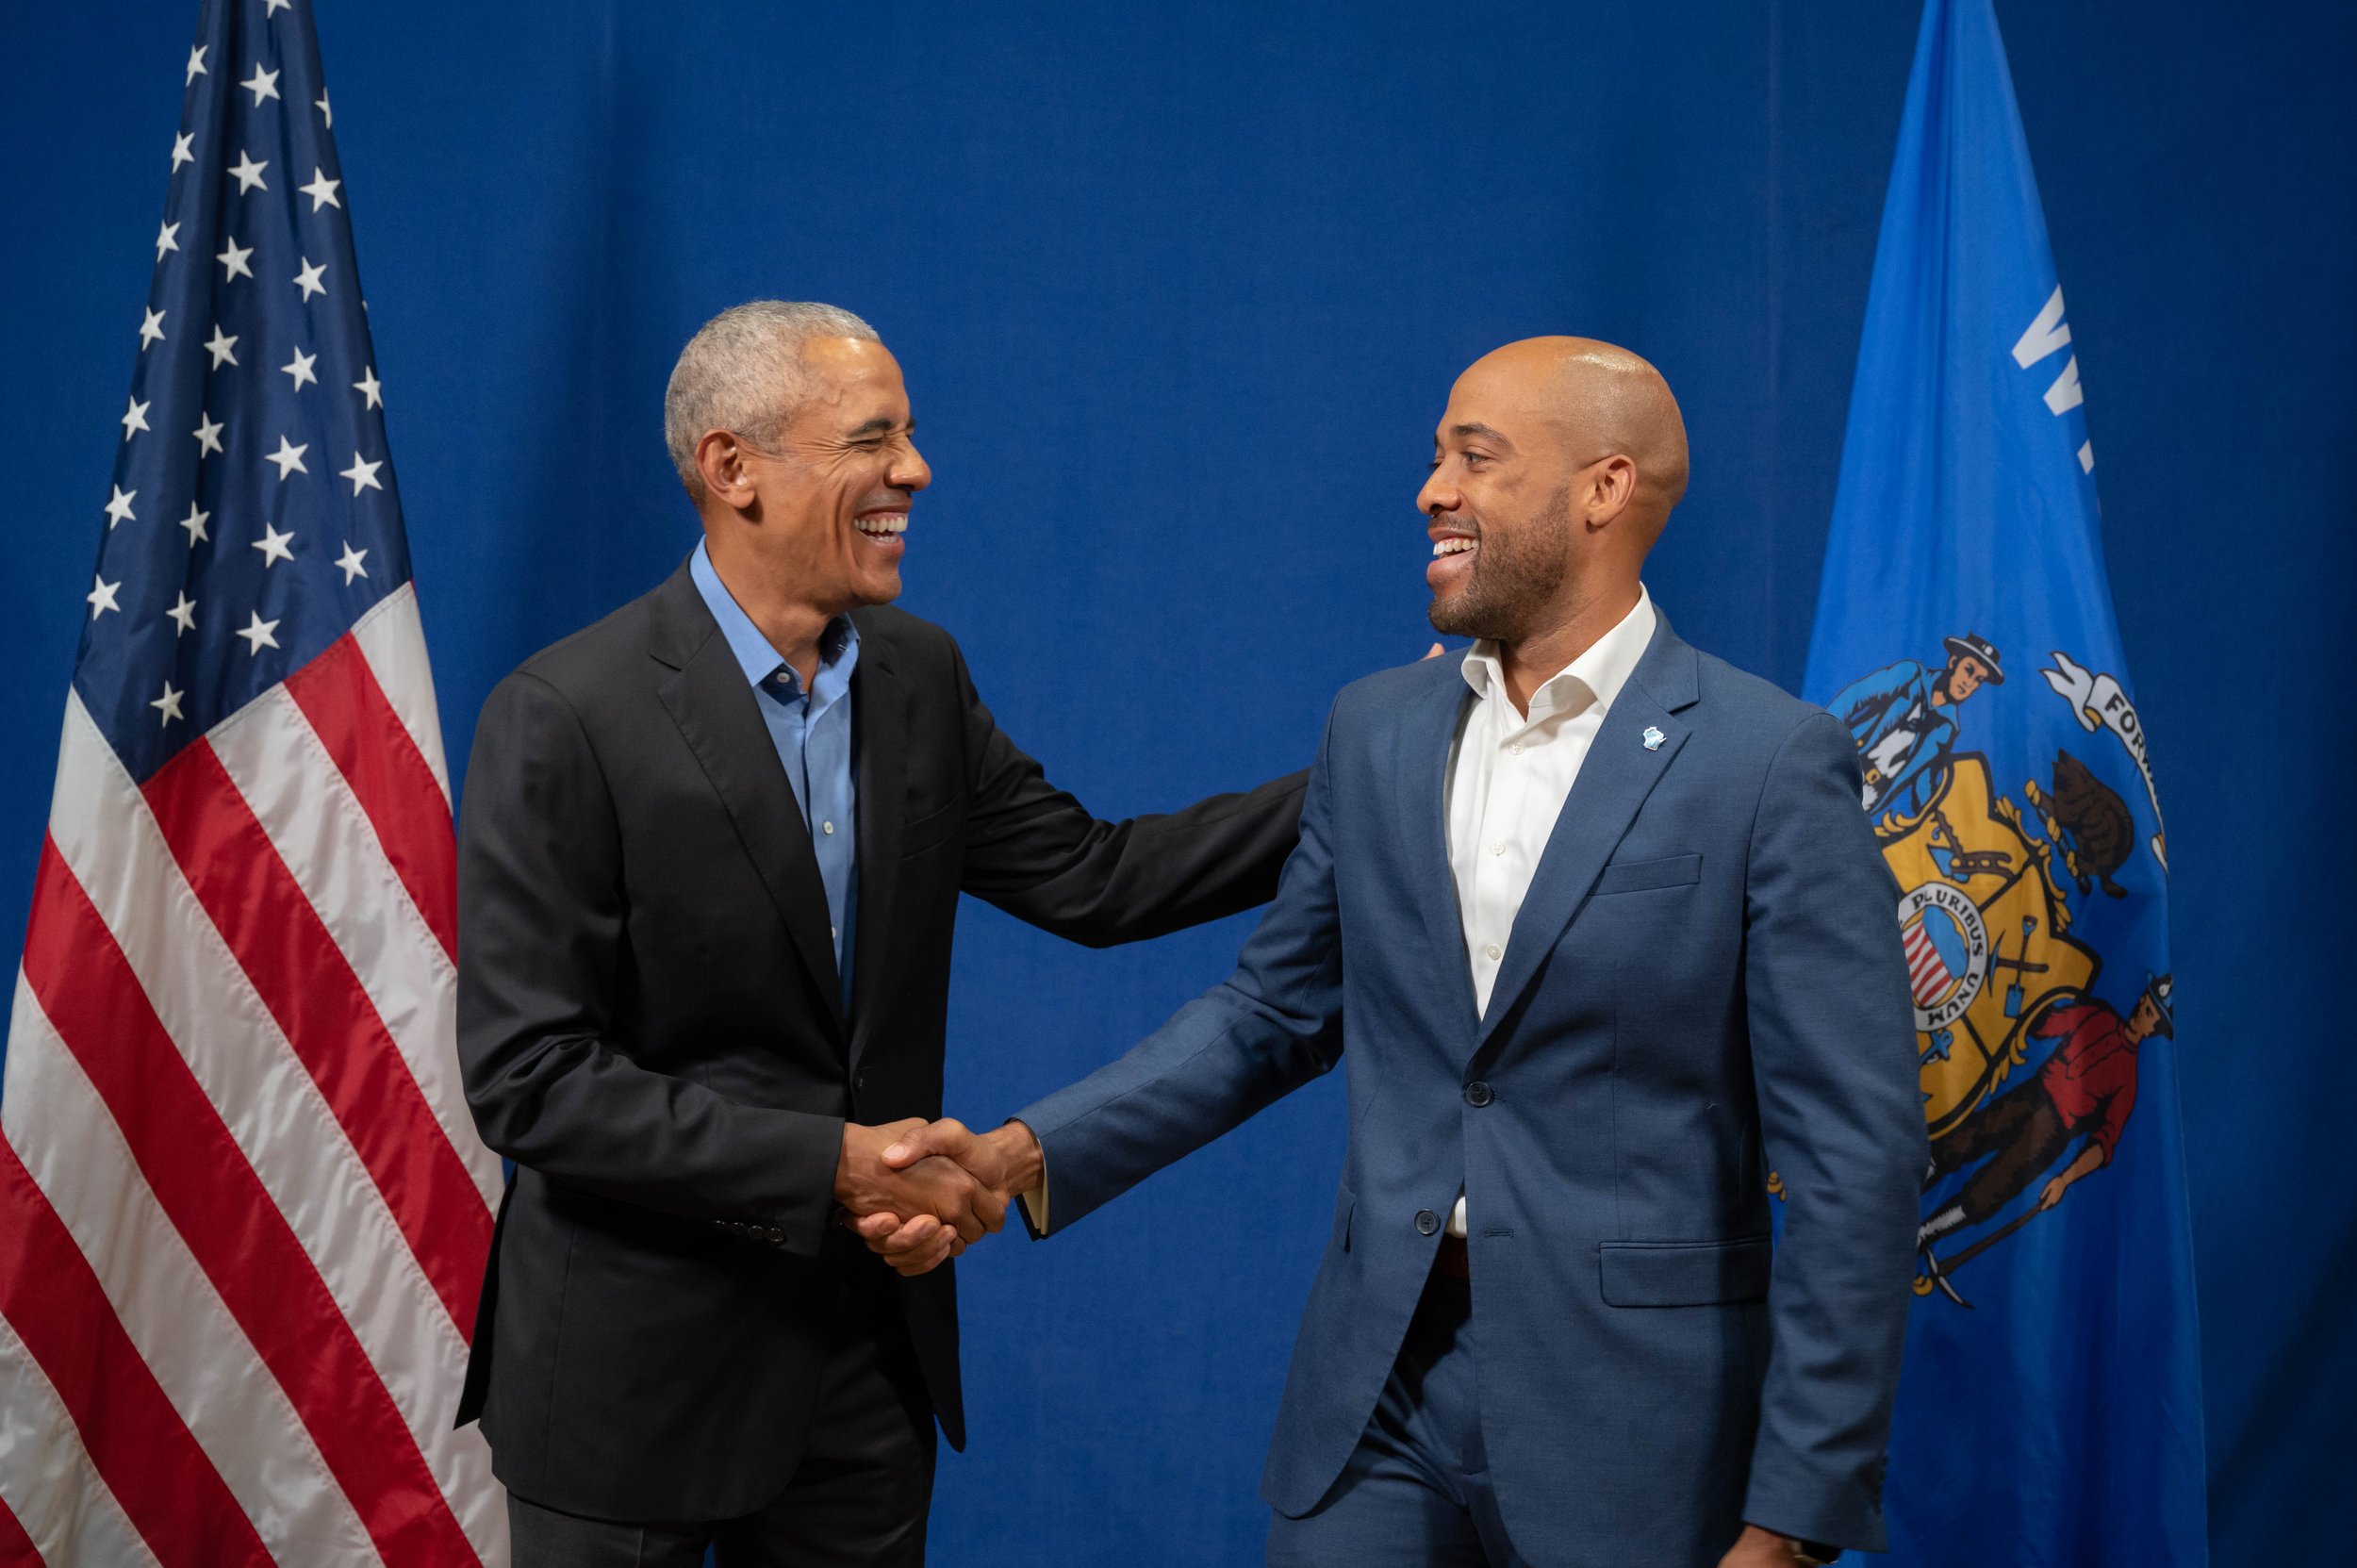 President Barack Obama and Lt. Governor Mandela Barnes backstage at a campaign rally in Milwaukee, WI